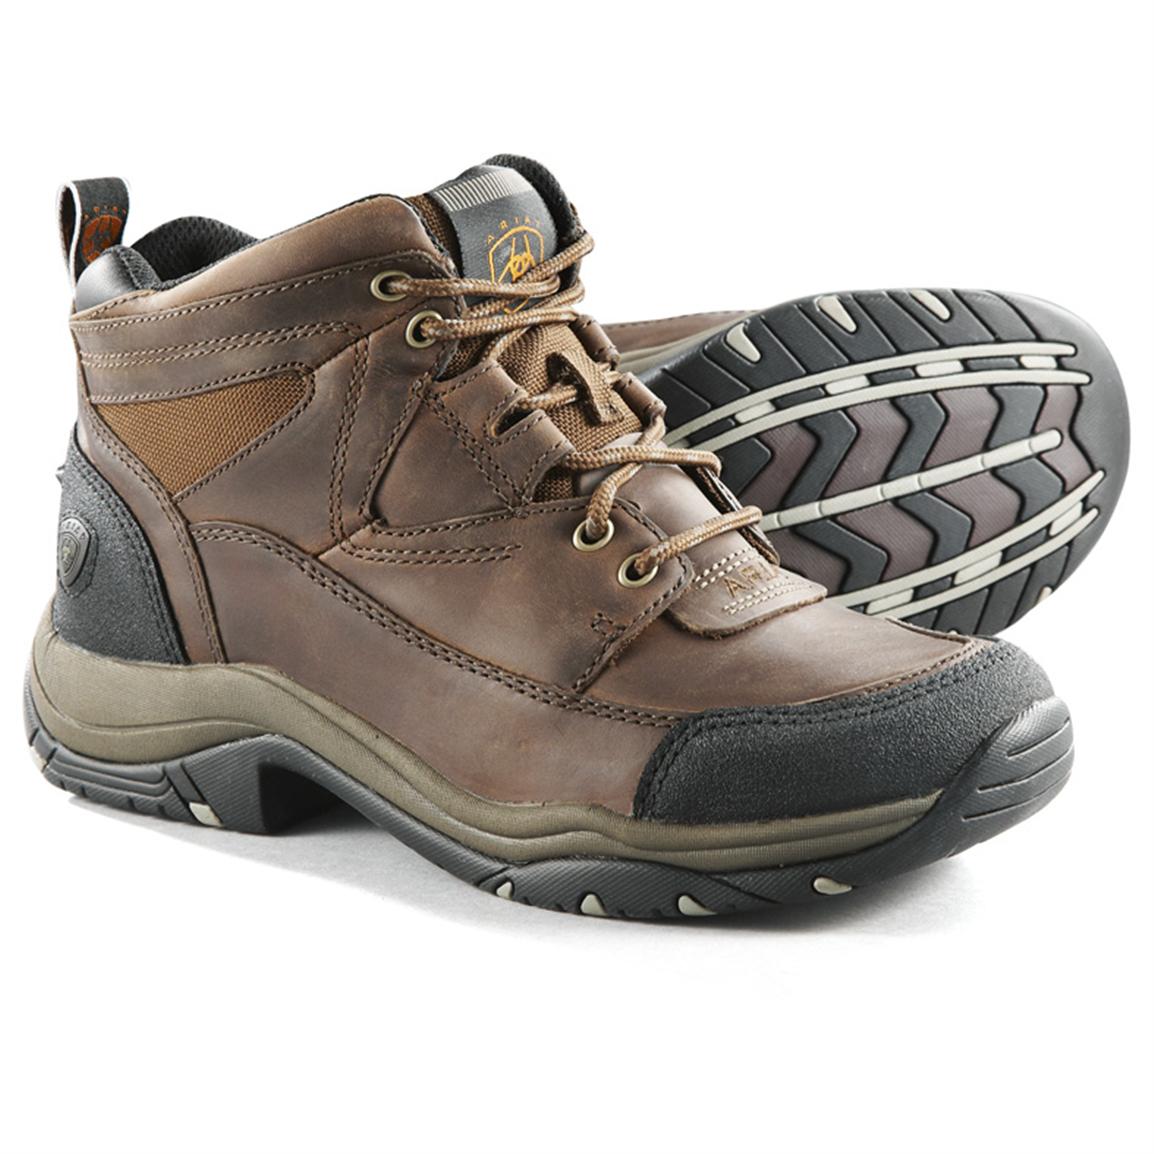 Ariat Men's Terrain Shoes - 282592, Hiking Boots & Shoes at ...